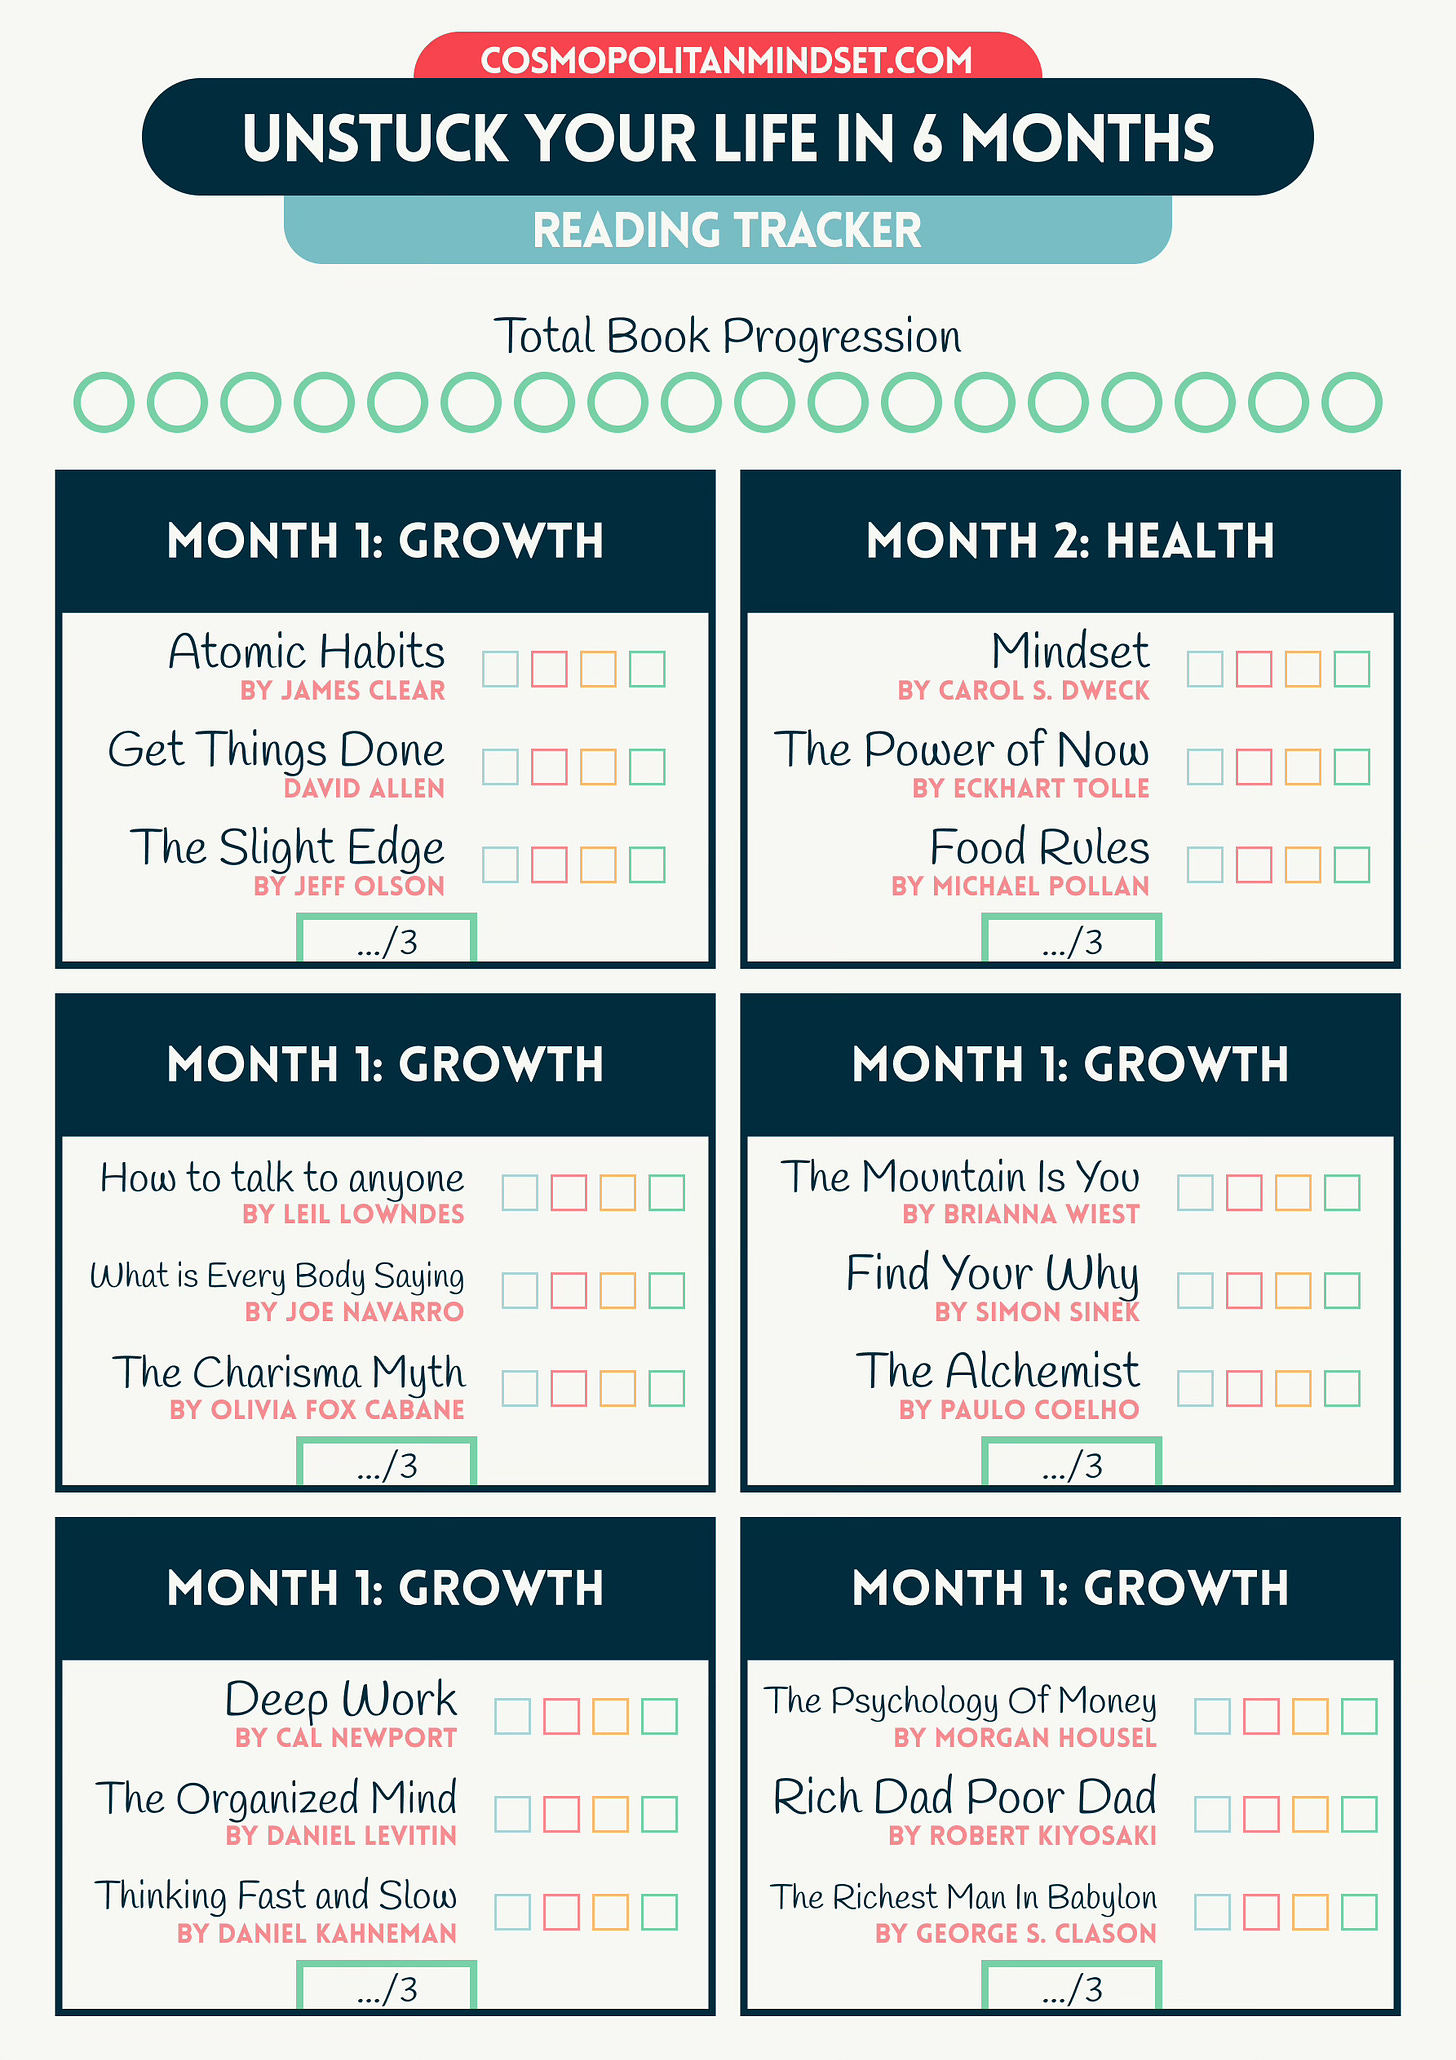 Unstuck Your Life in 6 Months - Reading Tracker